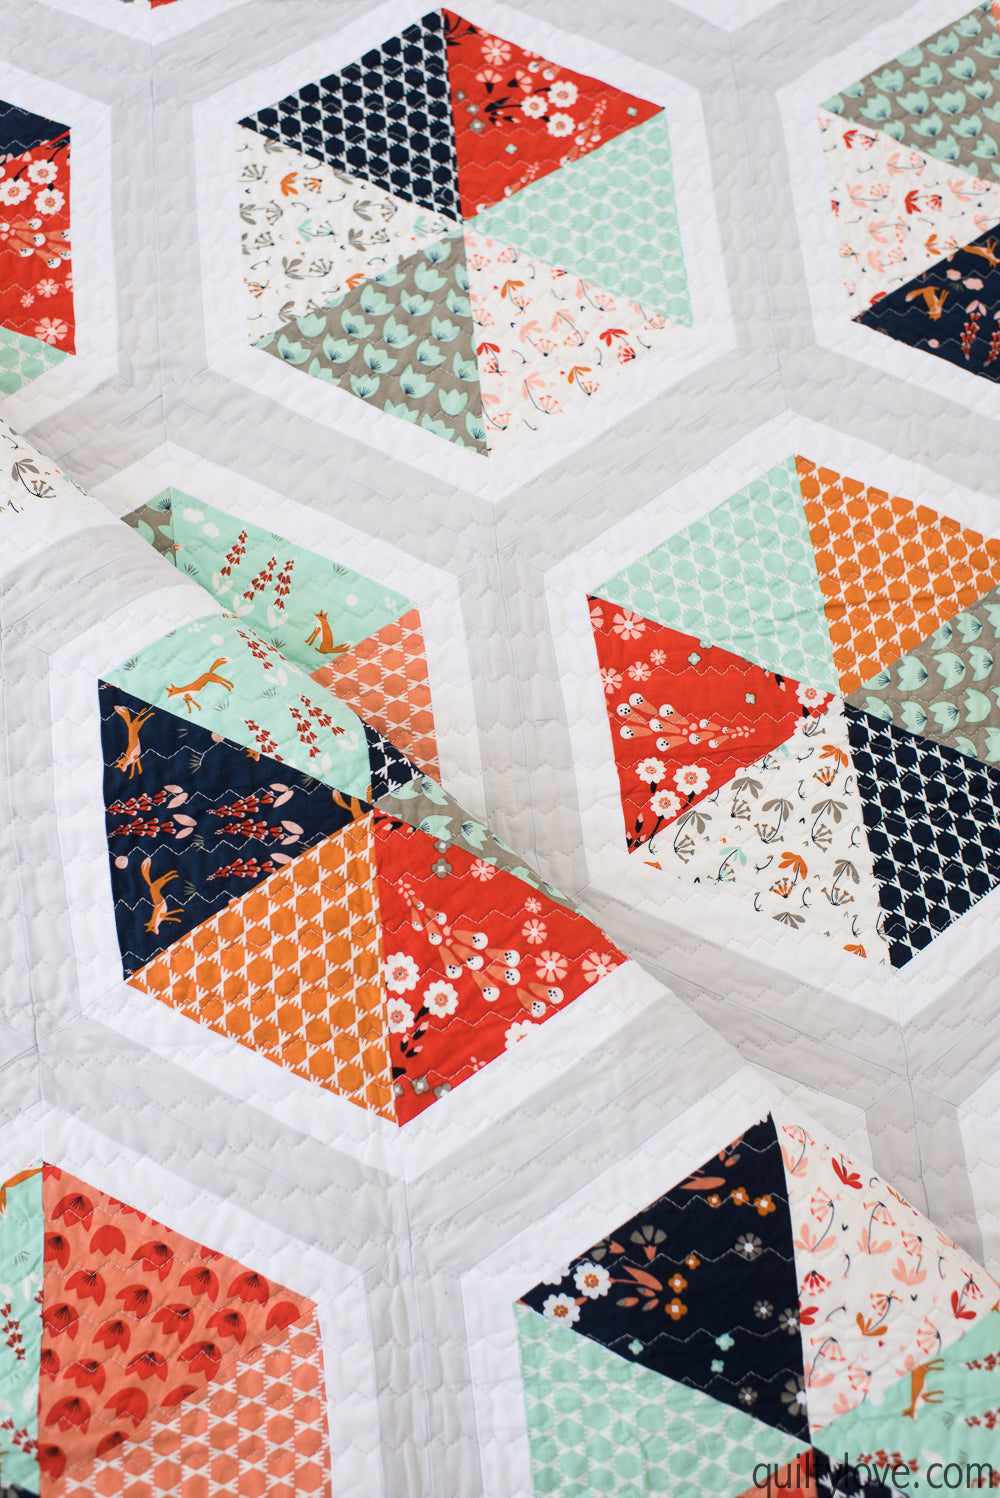 TRIANGLES BUNDLE- Triangle Hexies and Triangle Peaks PDF quilt pattern bundle - Automatic Download